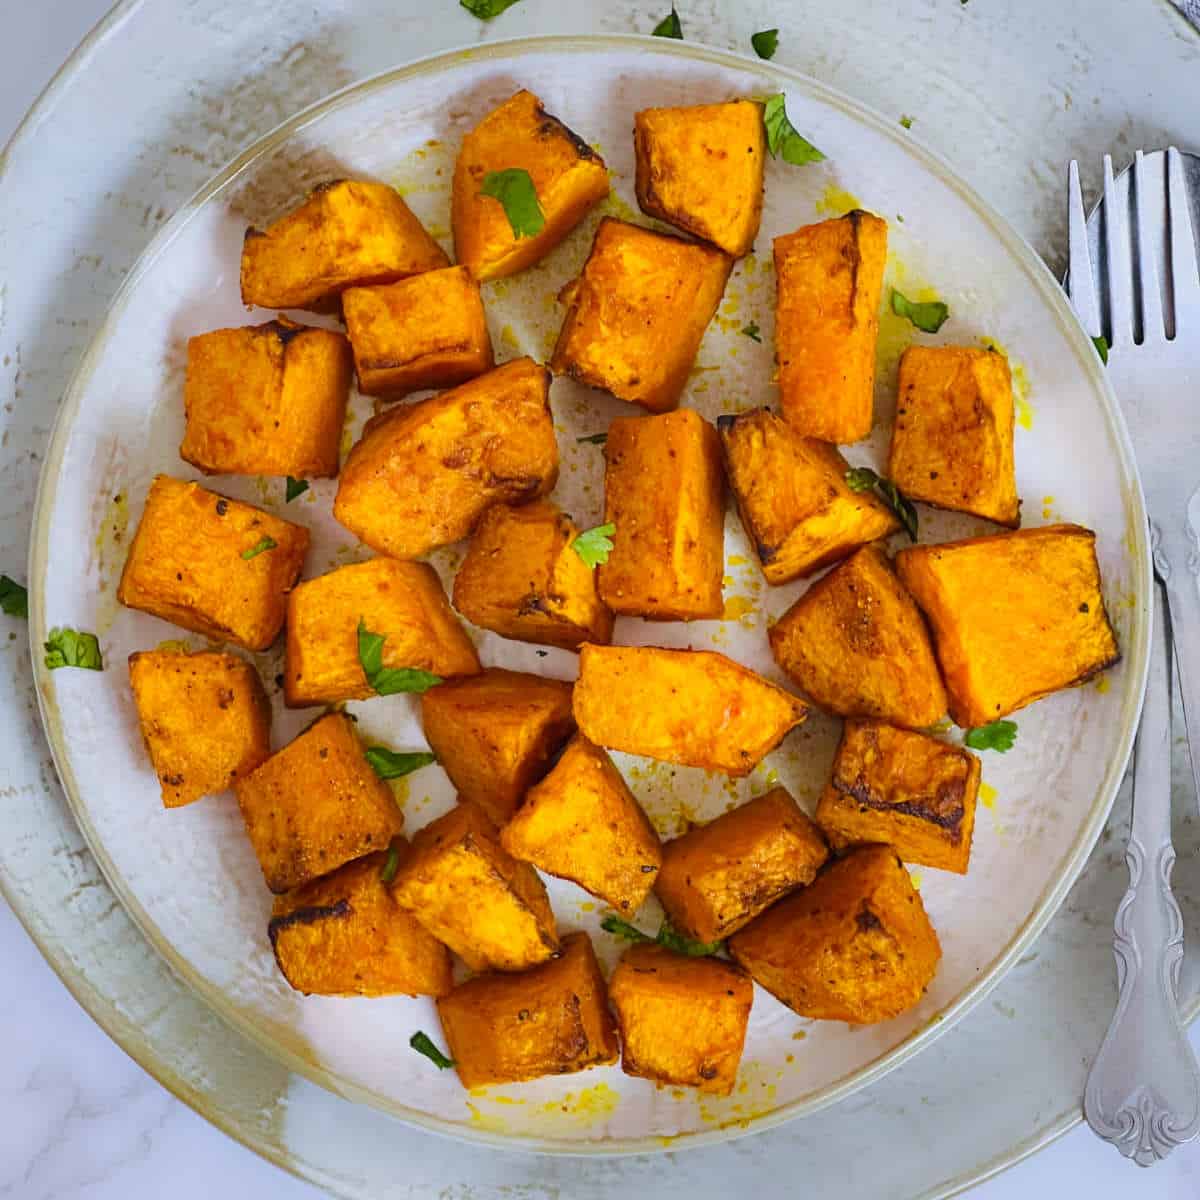 Air fryer roasted pumpkin cubes placed on a white plate.